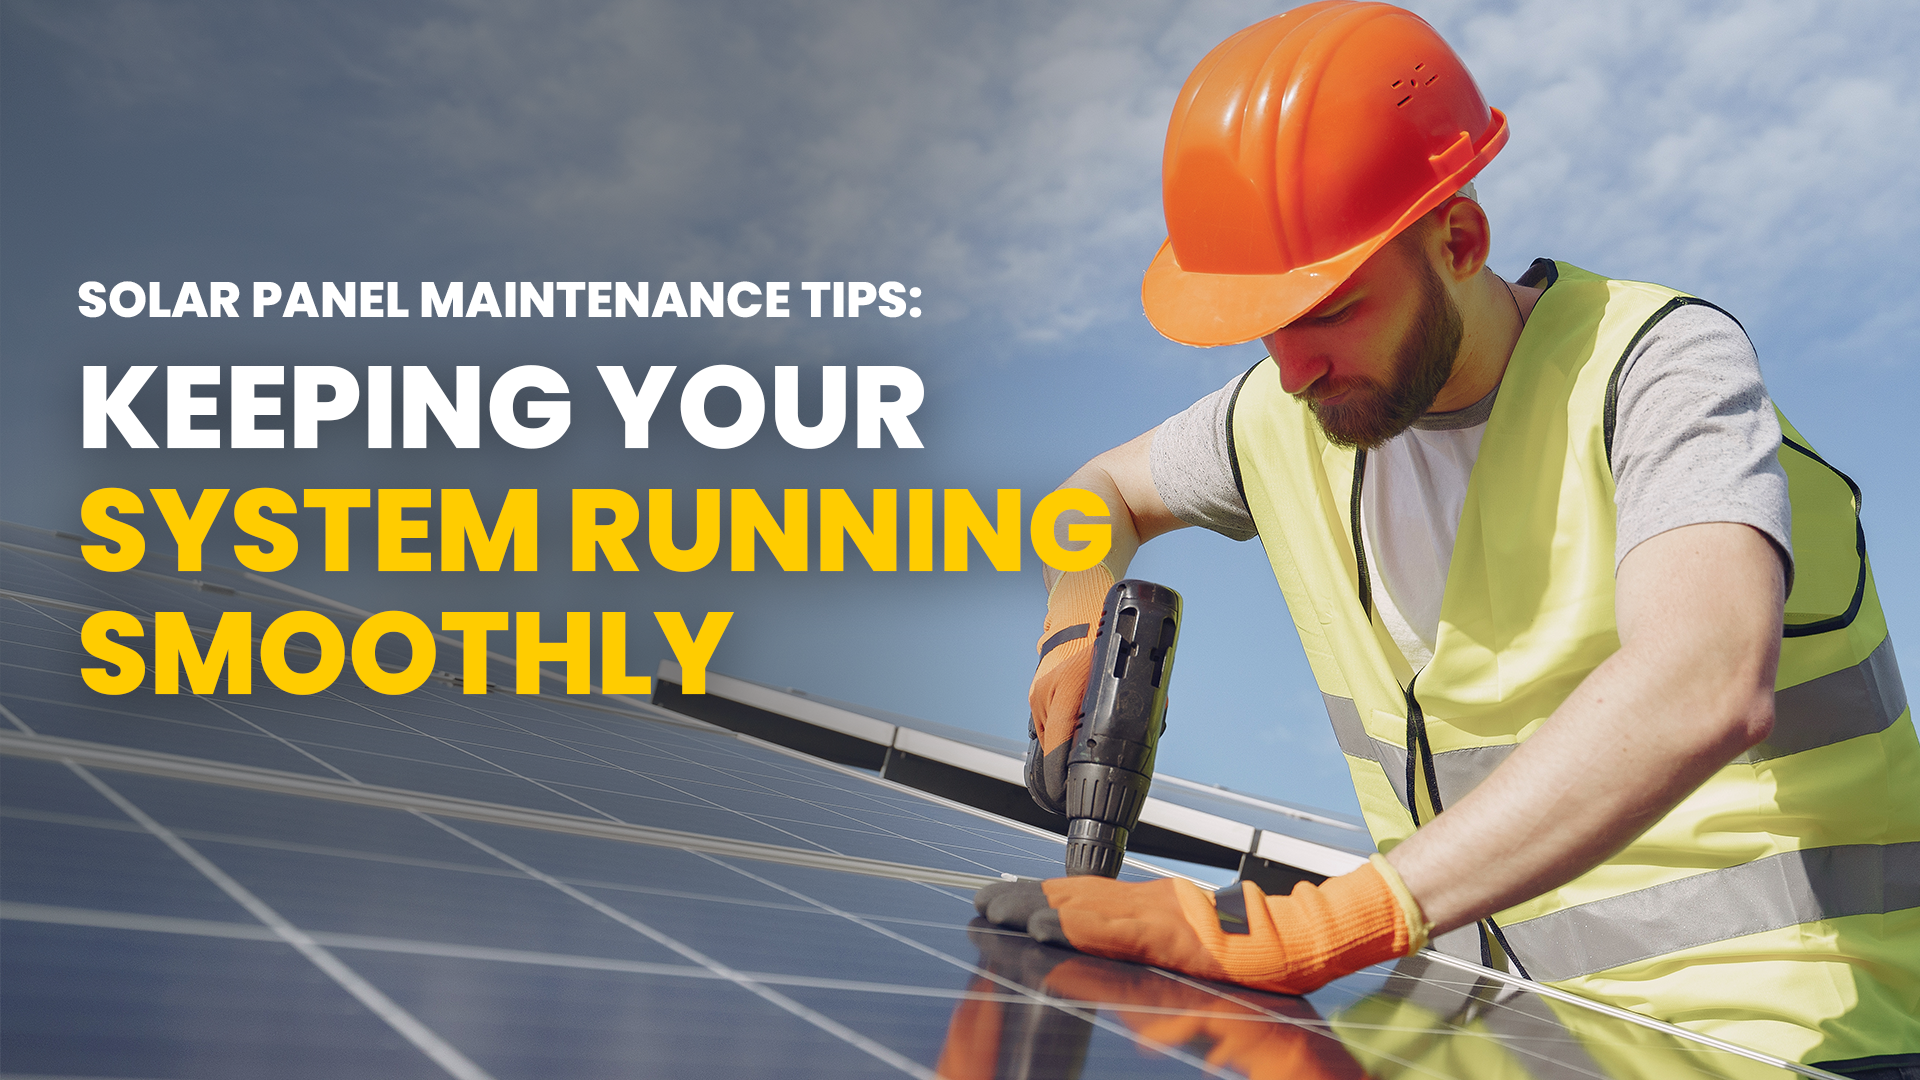 Solar Panel Maintenance Tips: Keeping Your System Running Smoothly